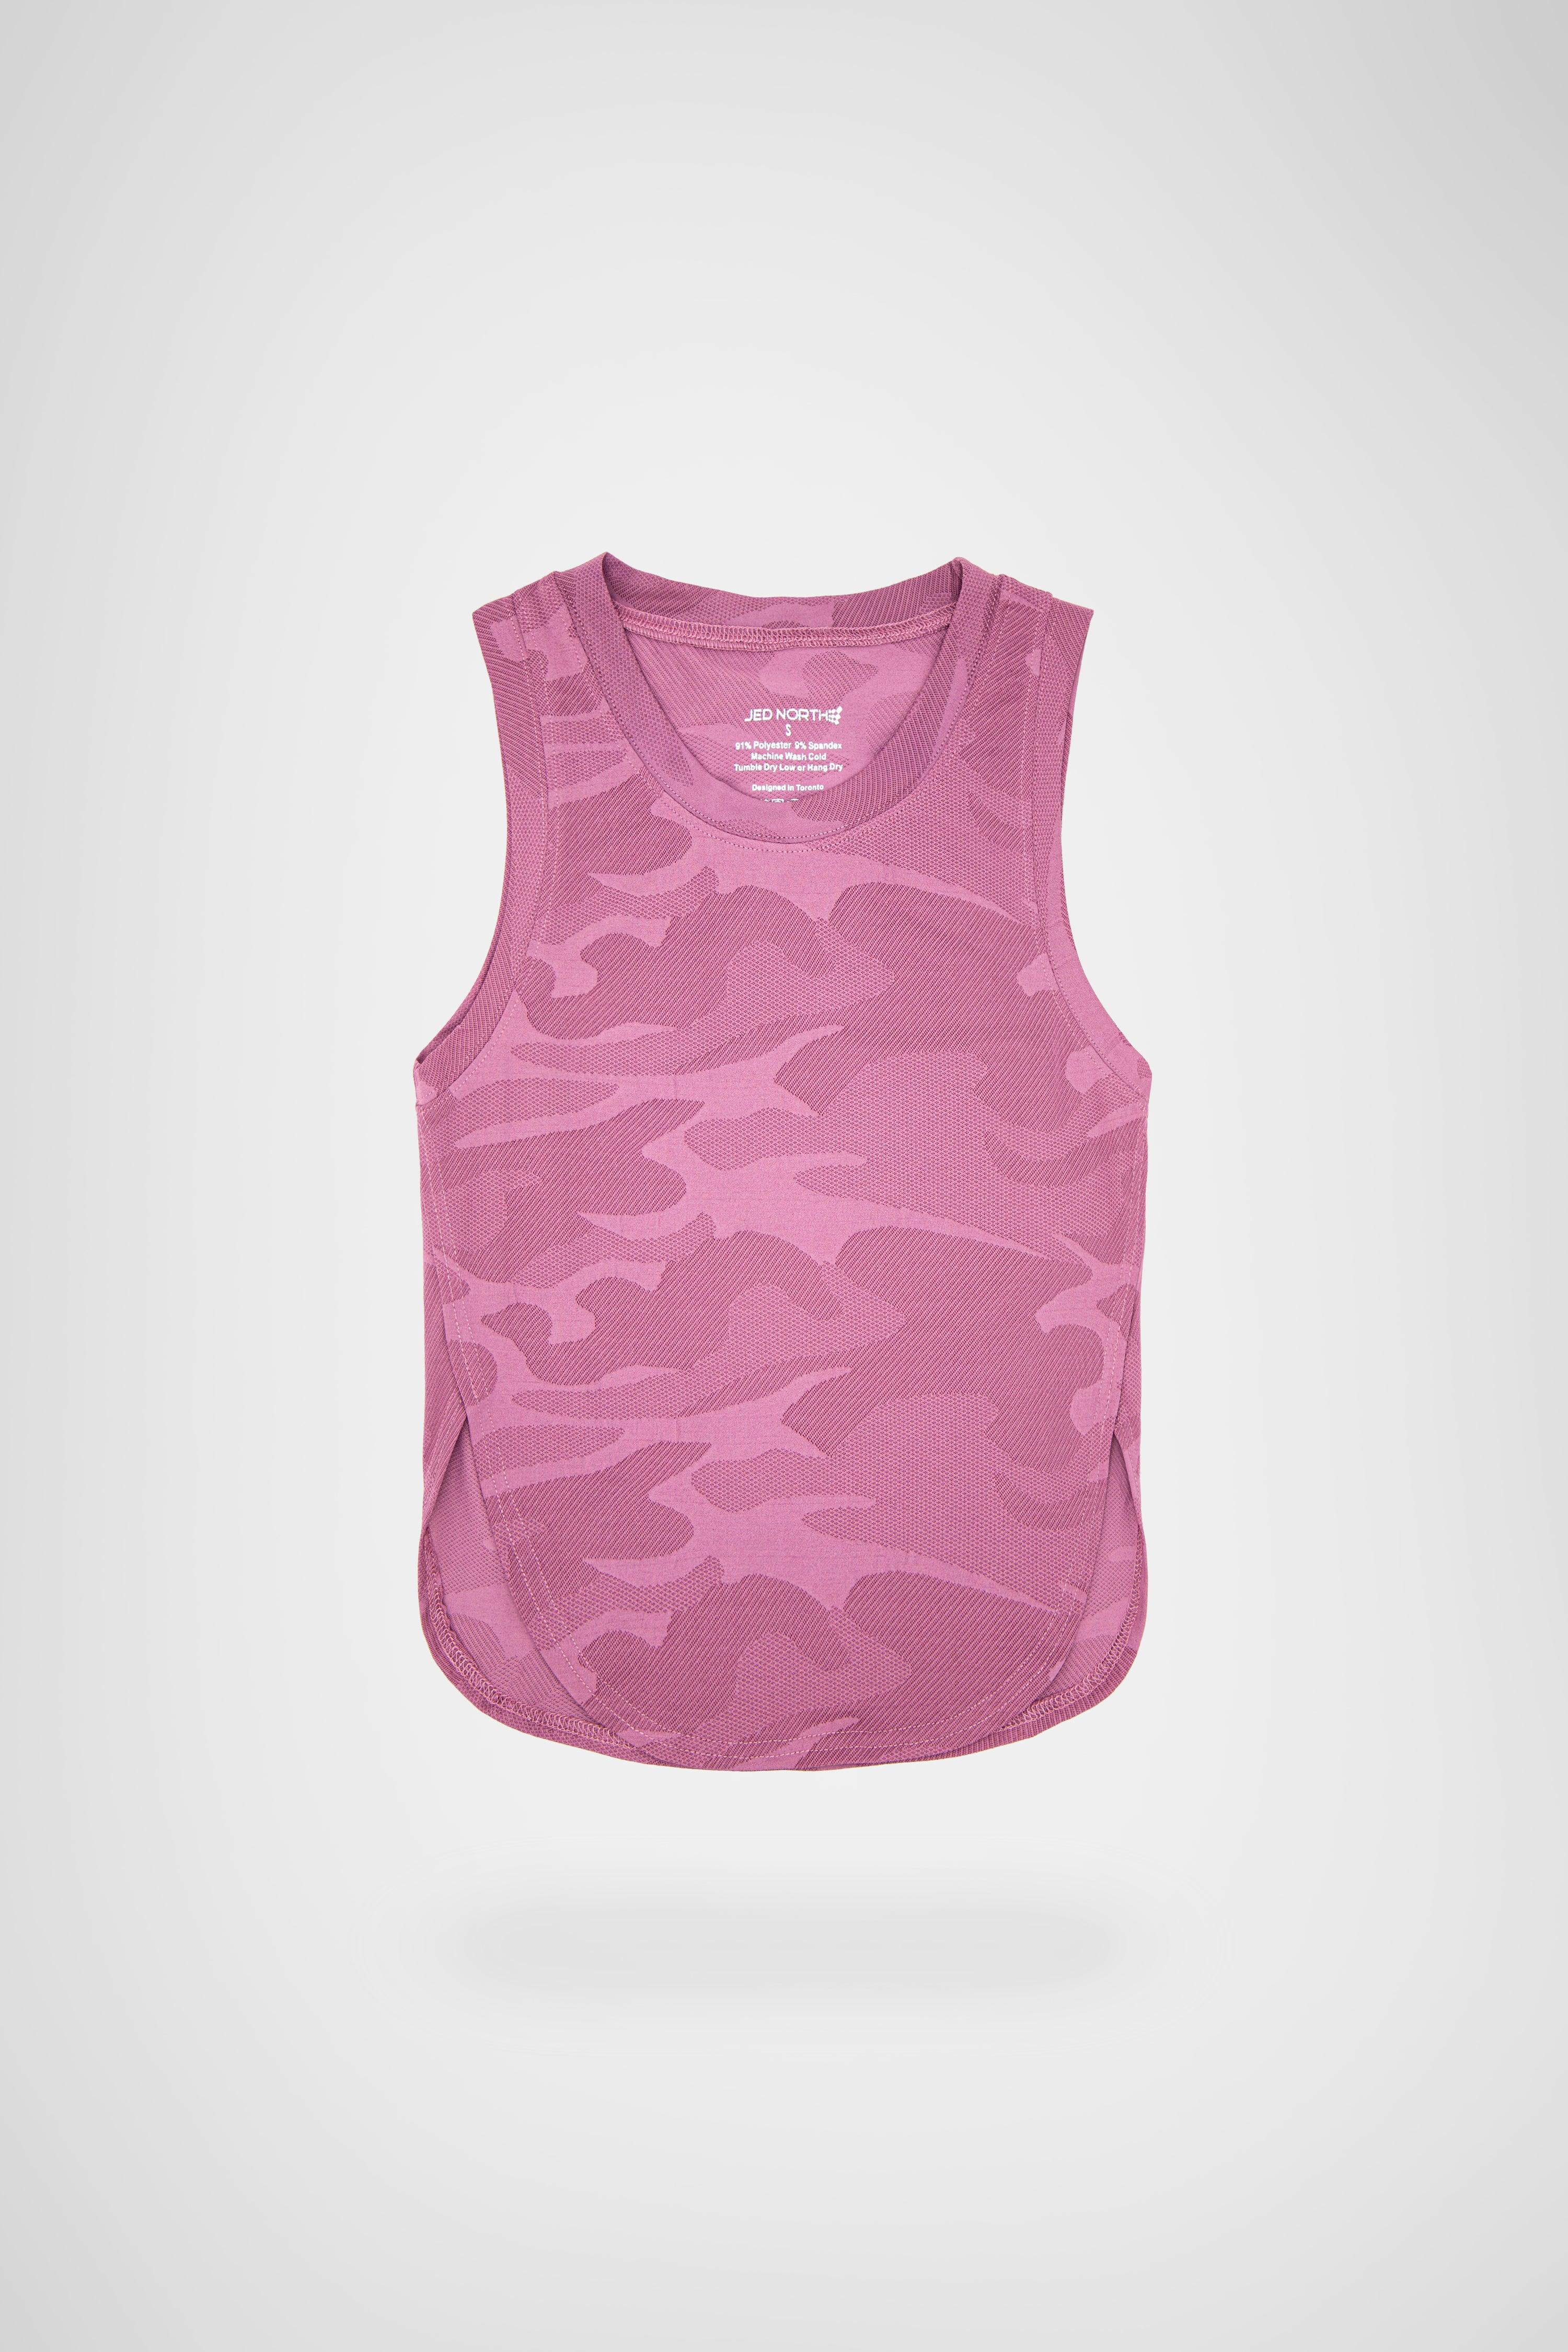 Breezy Mesh Tank Top - Pink Camo - Jed North Canada